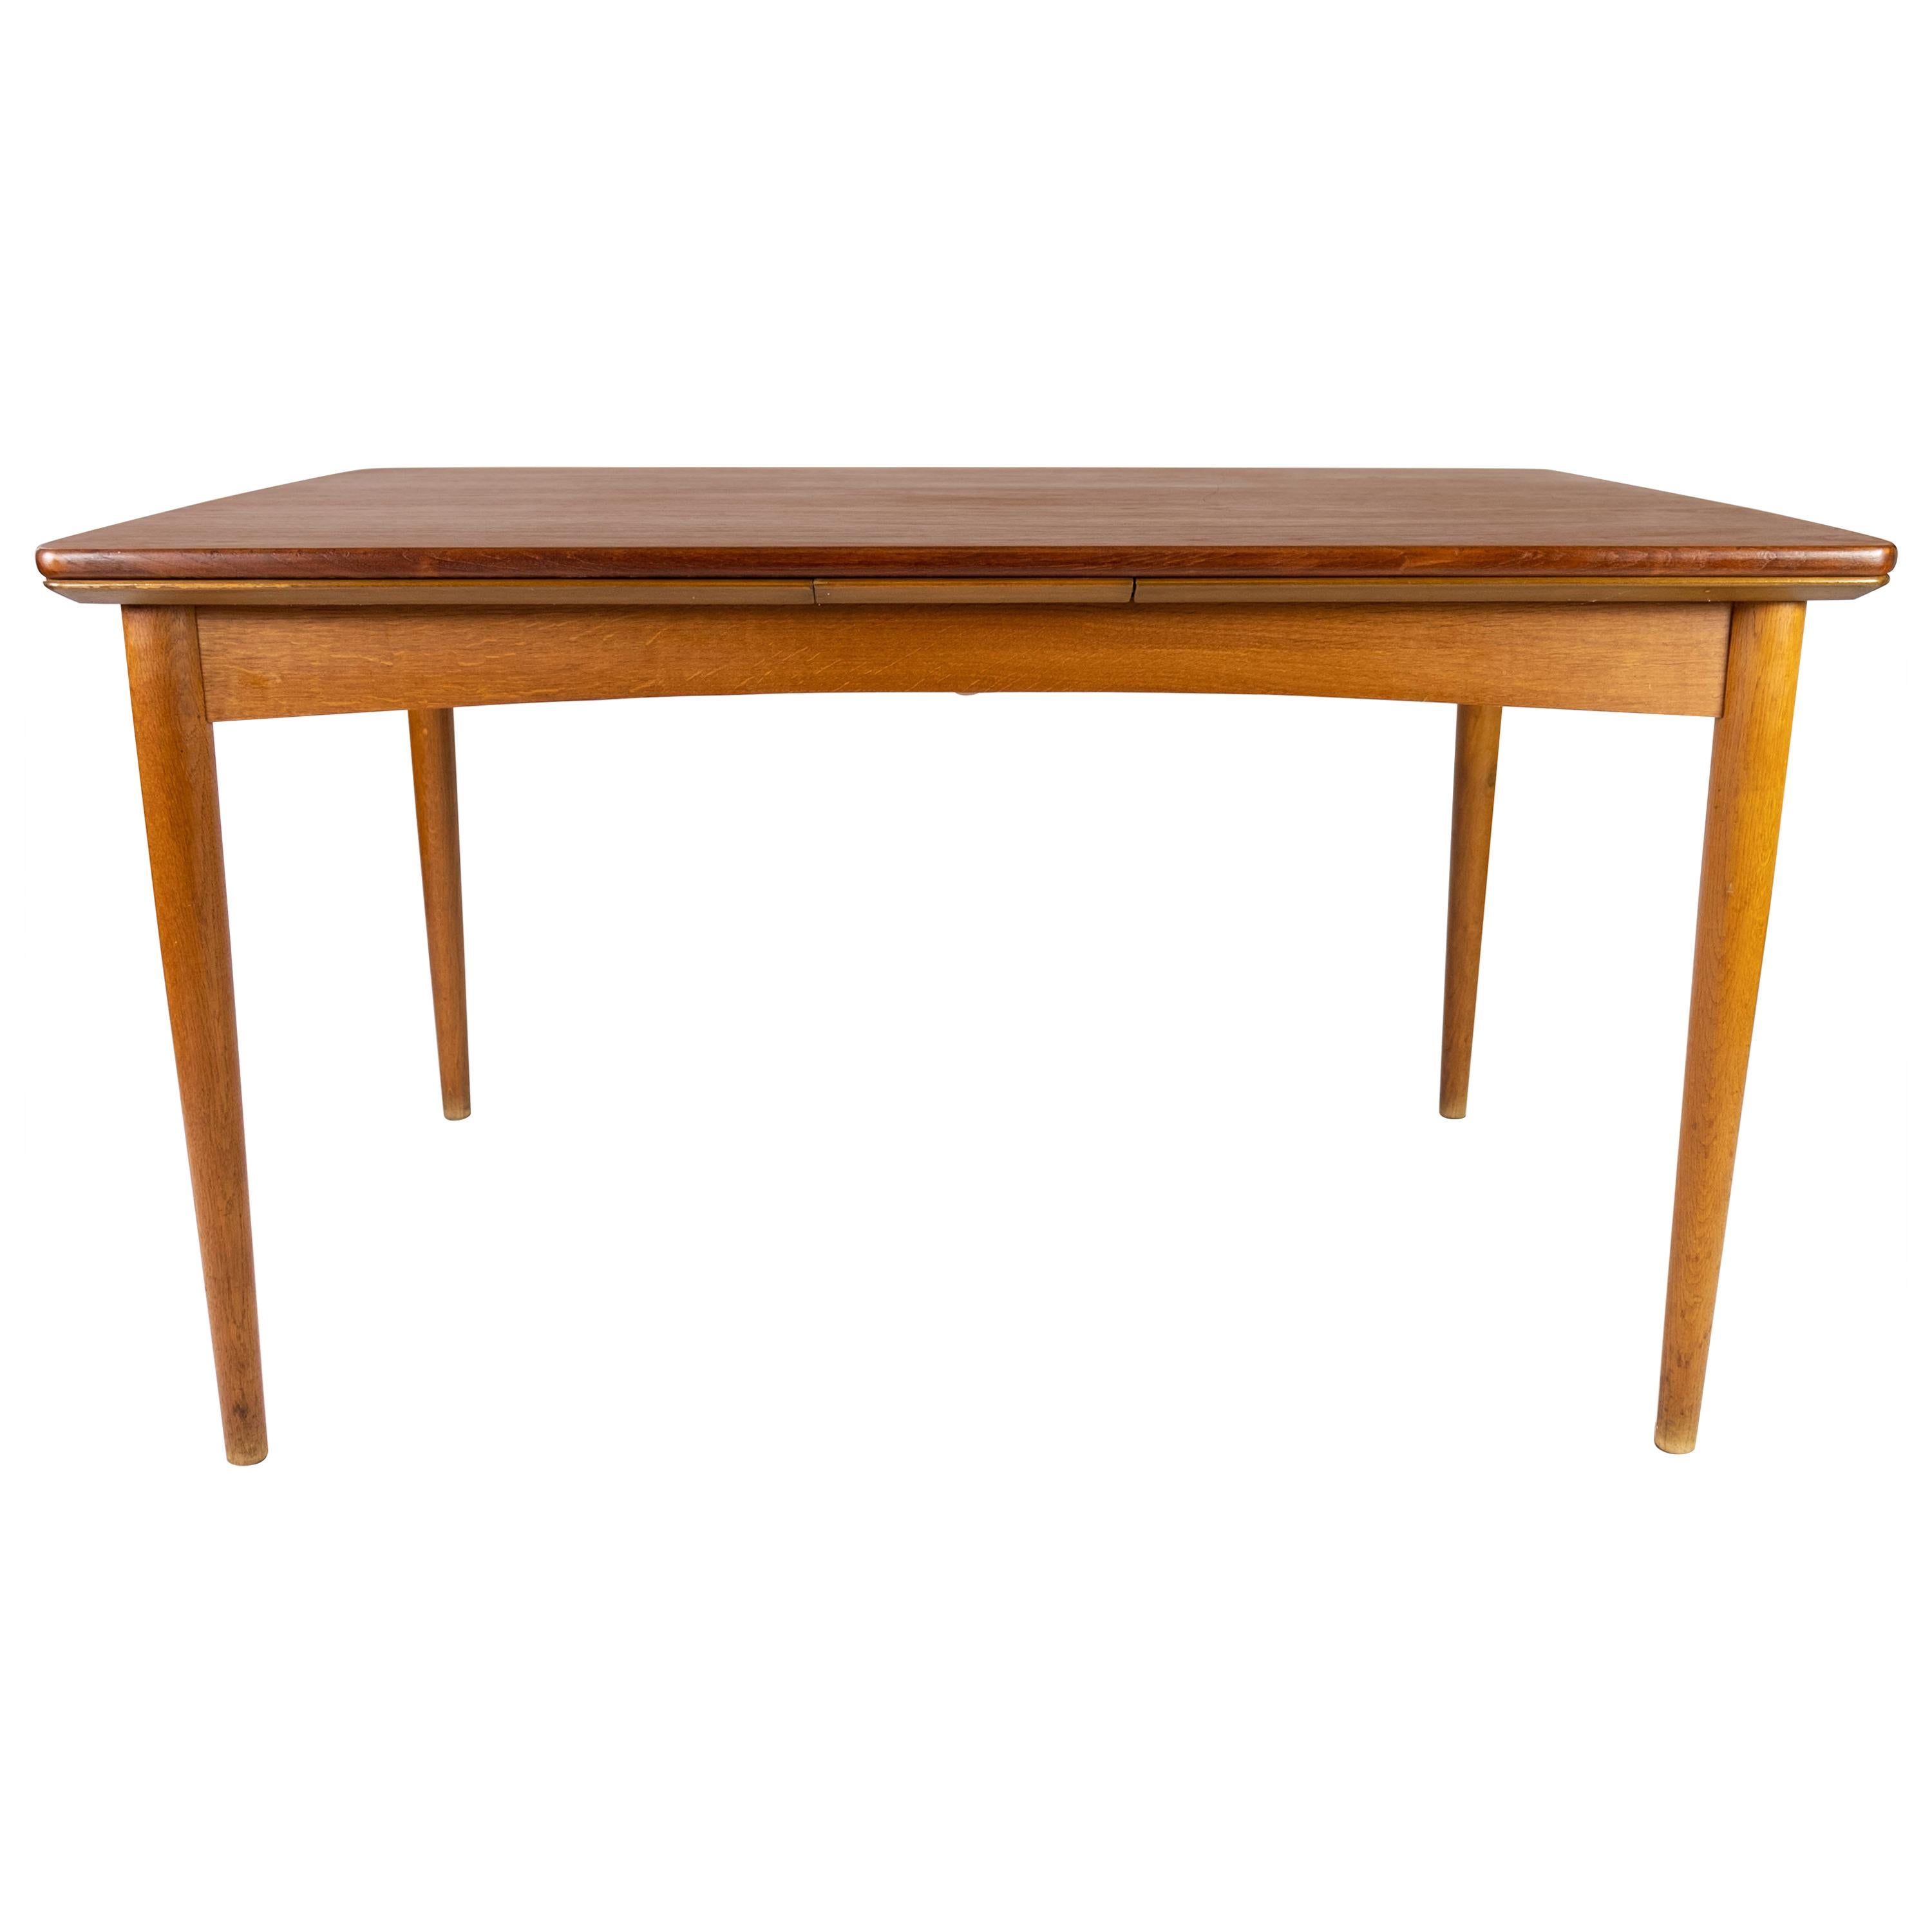 Dining Table in Teak with Extentions and Legs in Oak, of Danish Design, 1960s